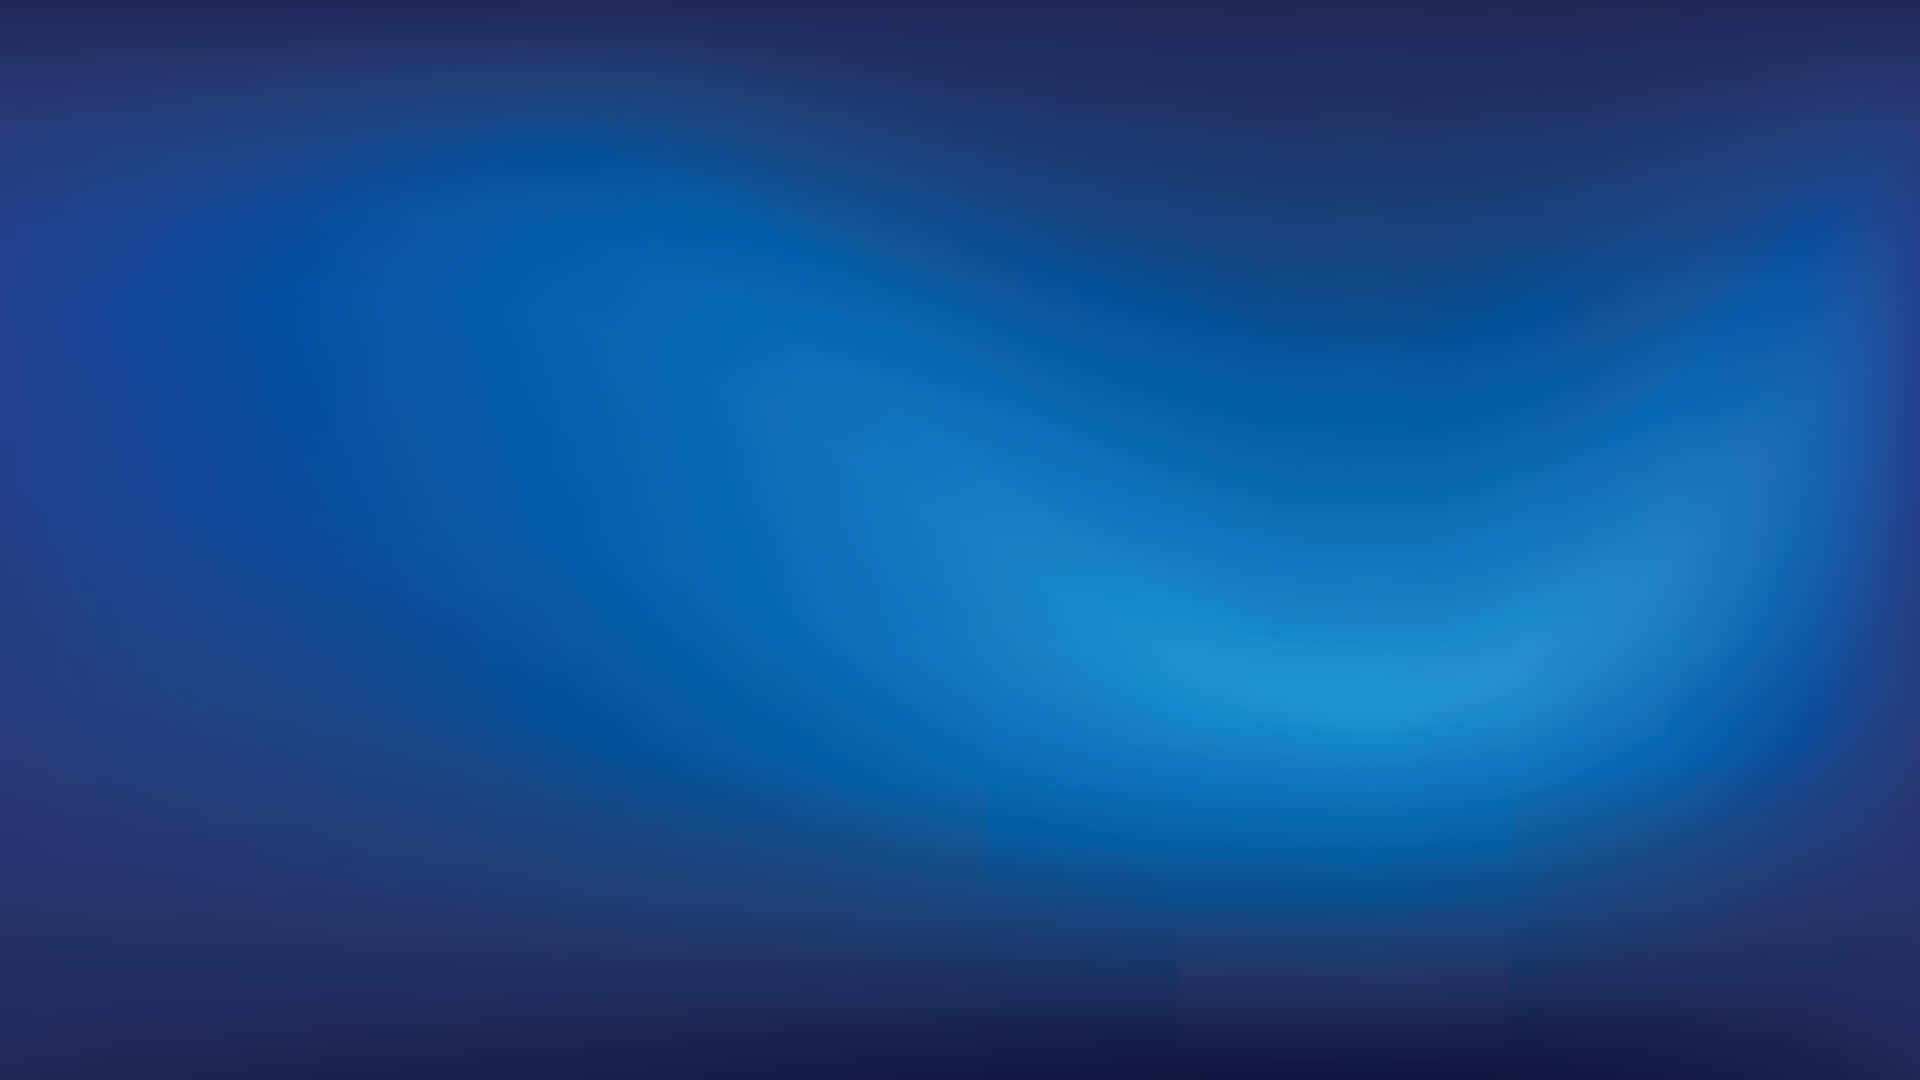 An abstract blue and white digital background